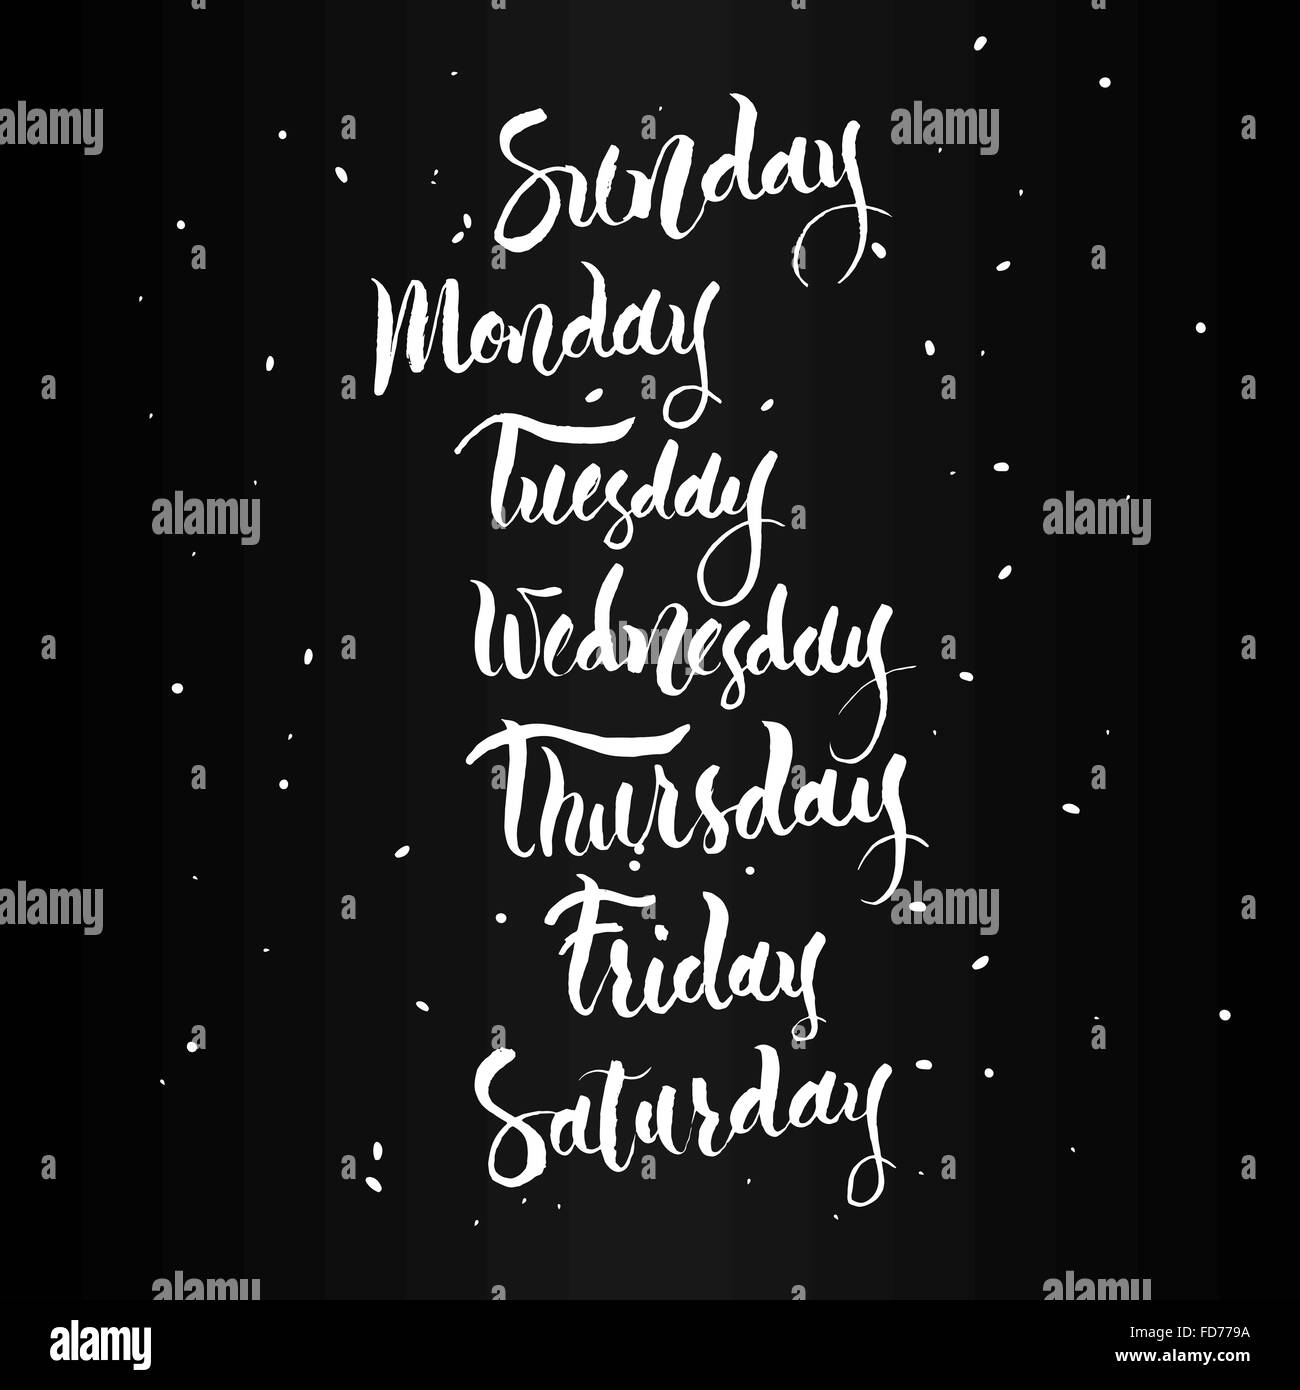 What is the meaning of Sunday , Monday , Tuesday, Wednesday , Thursday,  Friday , Saturday ?? 